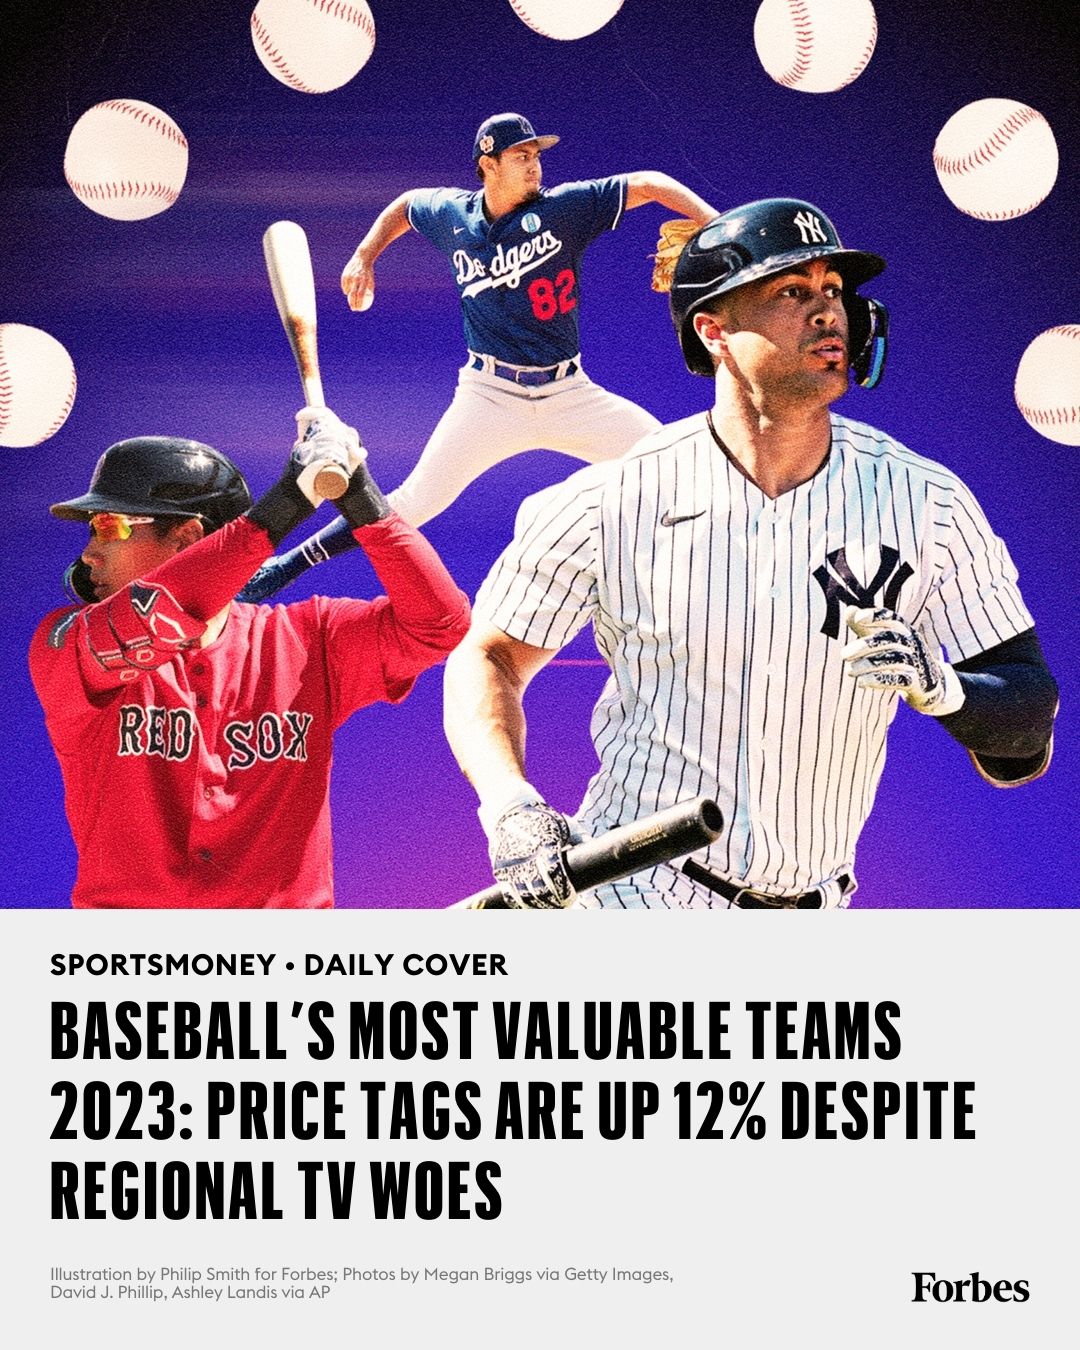 Forbes lists Red Sox as MLB's third-most valuable franchise at